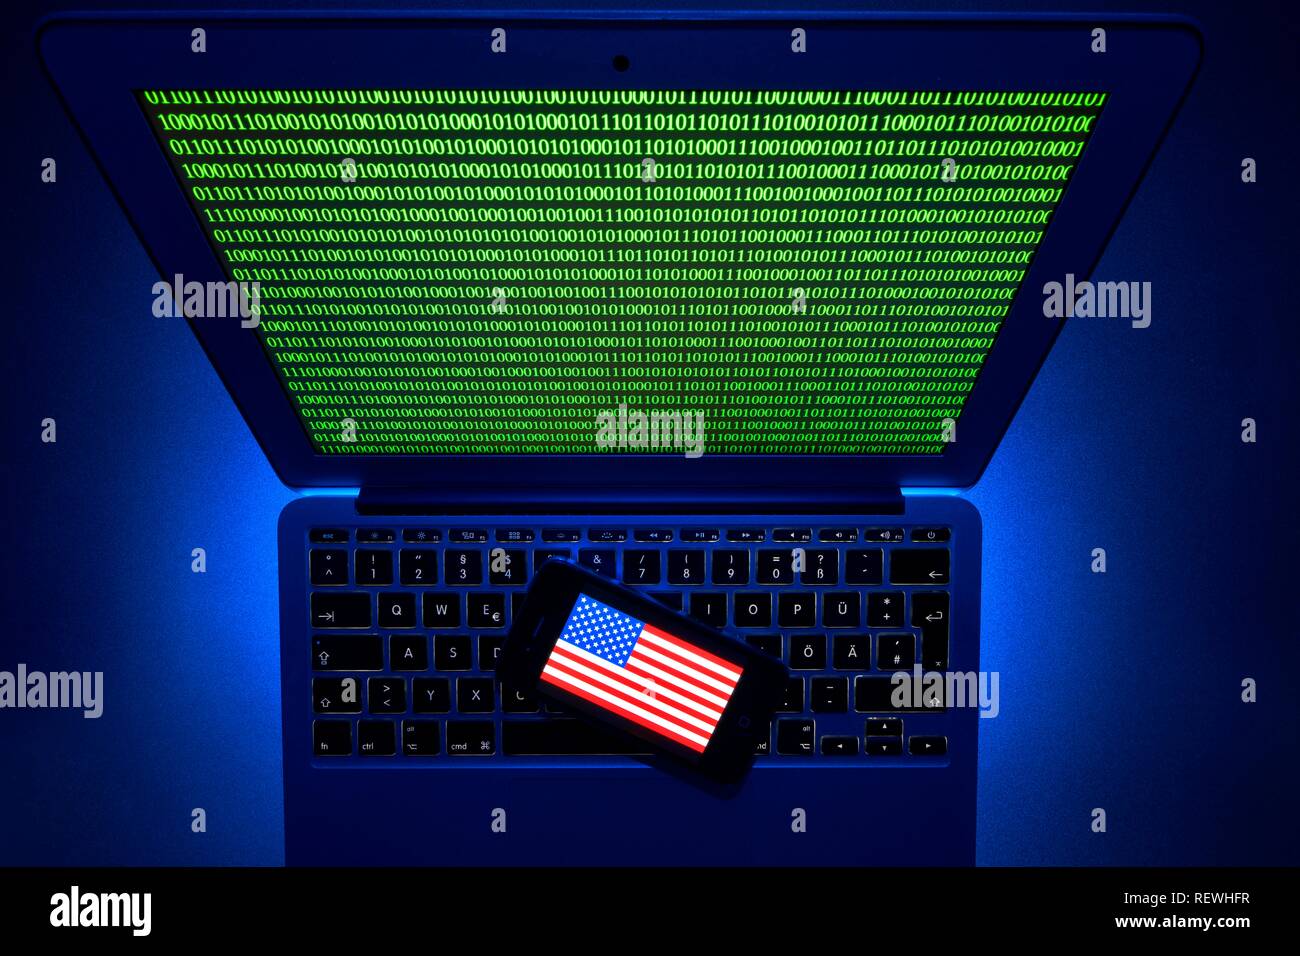 Smartphone with US flag on computer keyboard, symbol image Cybercrime, hacker attack, Baden-Württemberg, Germany Stock Photo